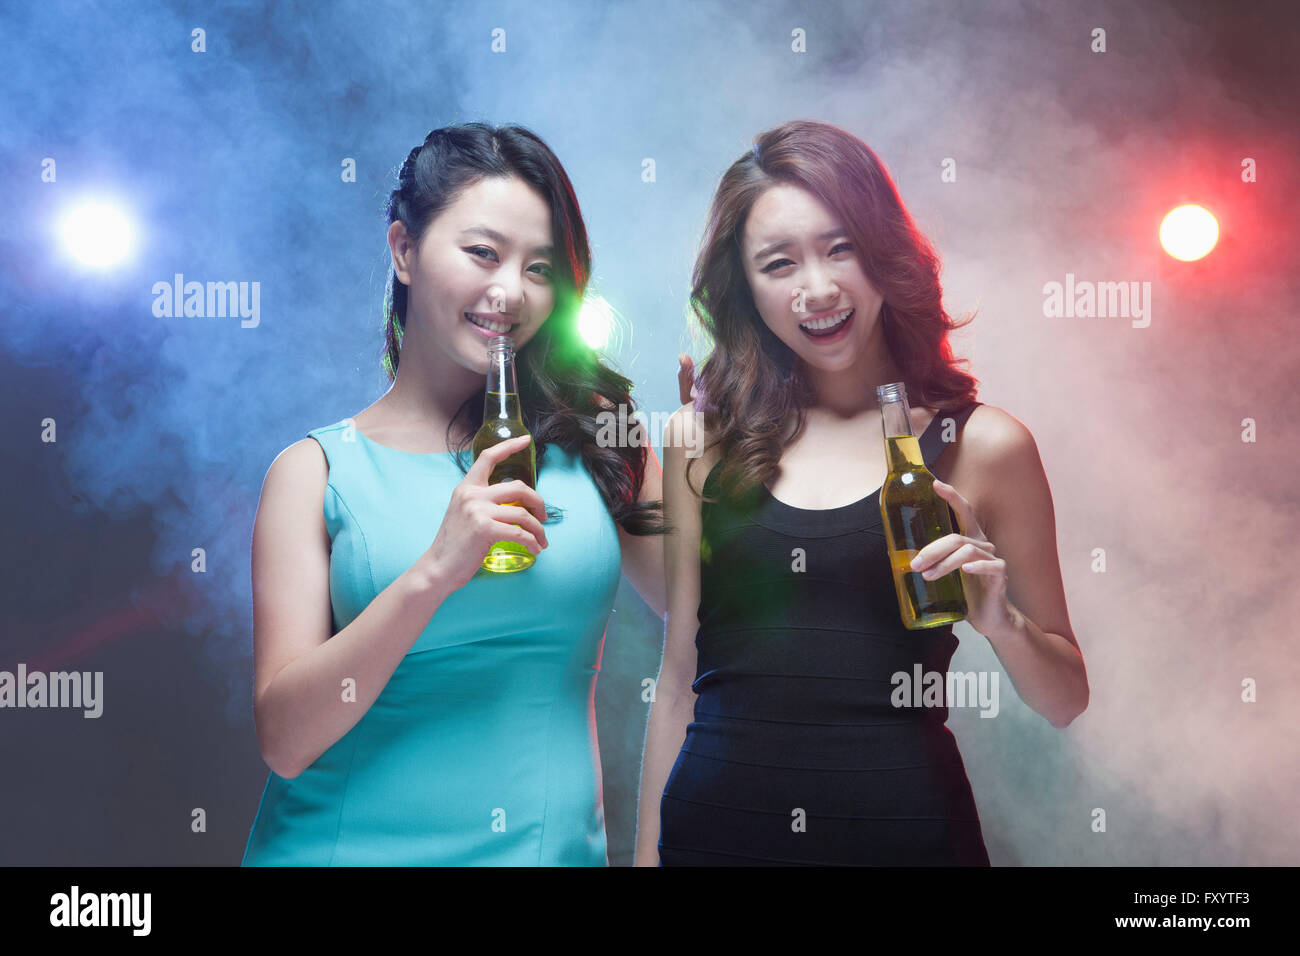 Portrait of two young smiling women holding beer bottles staring at front Stock Photo